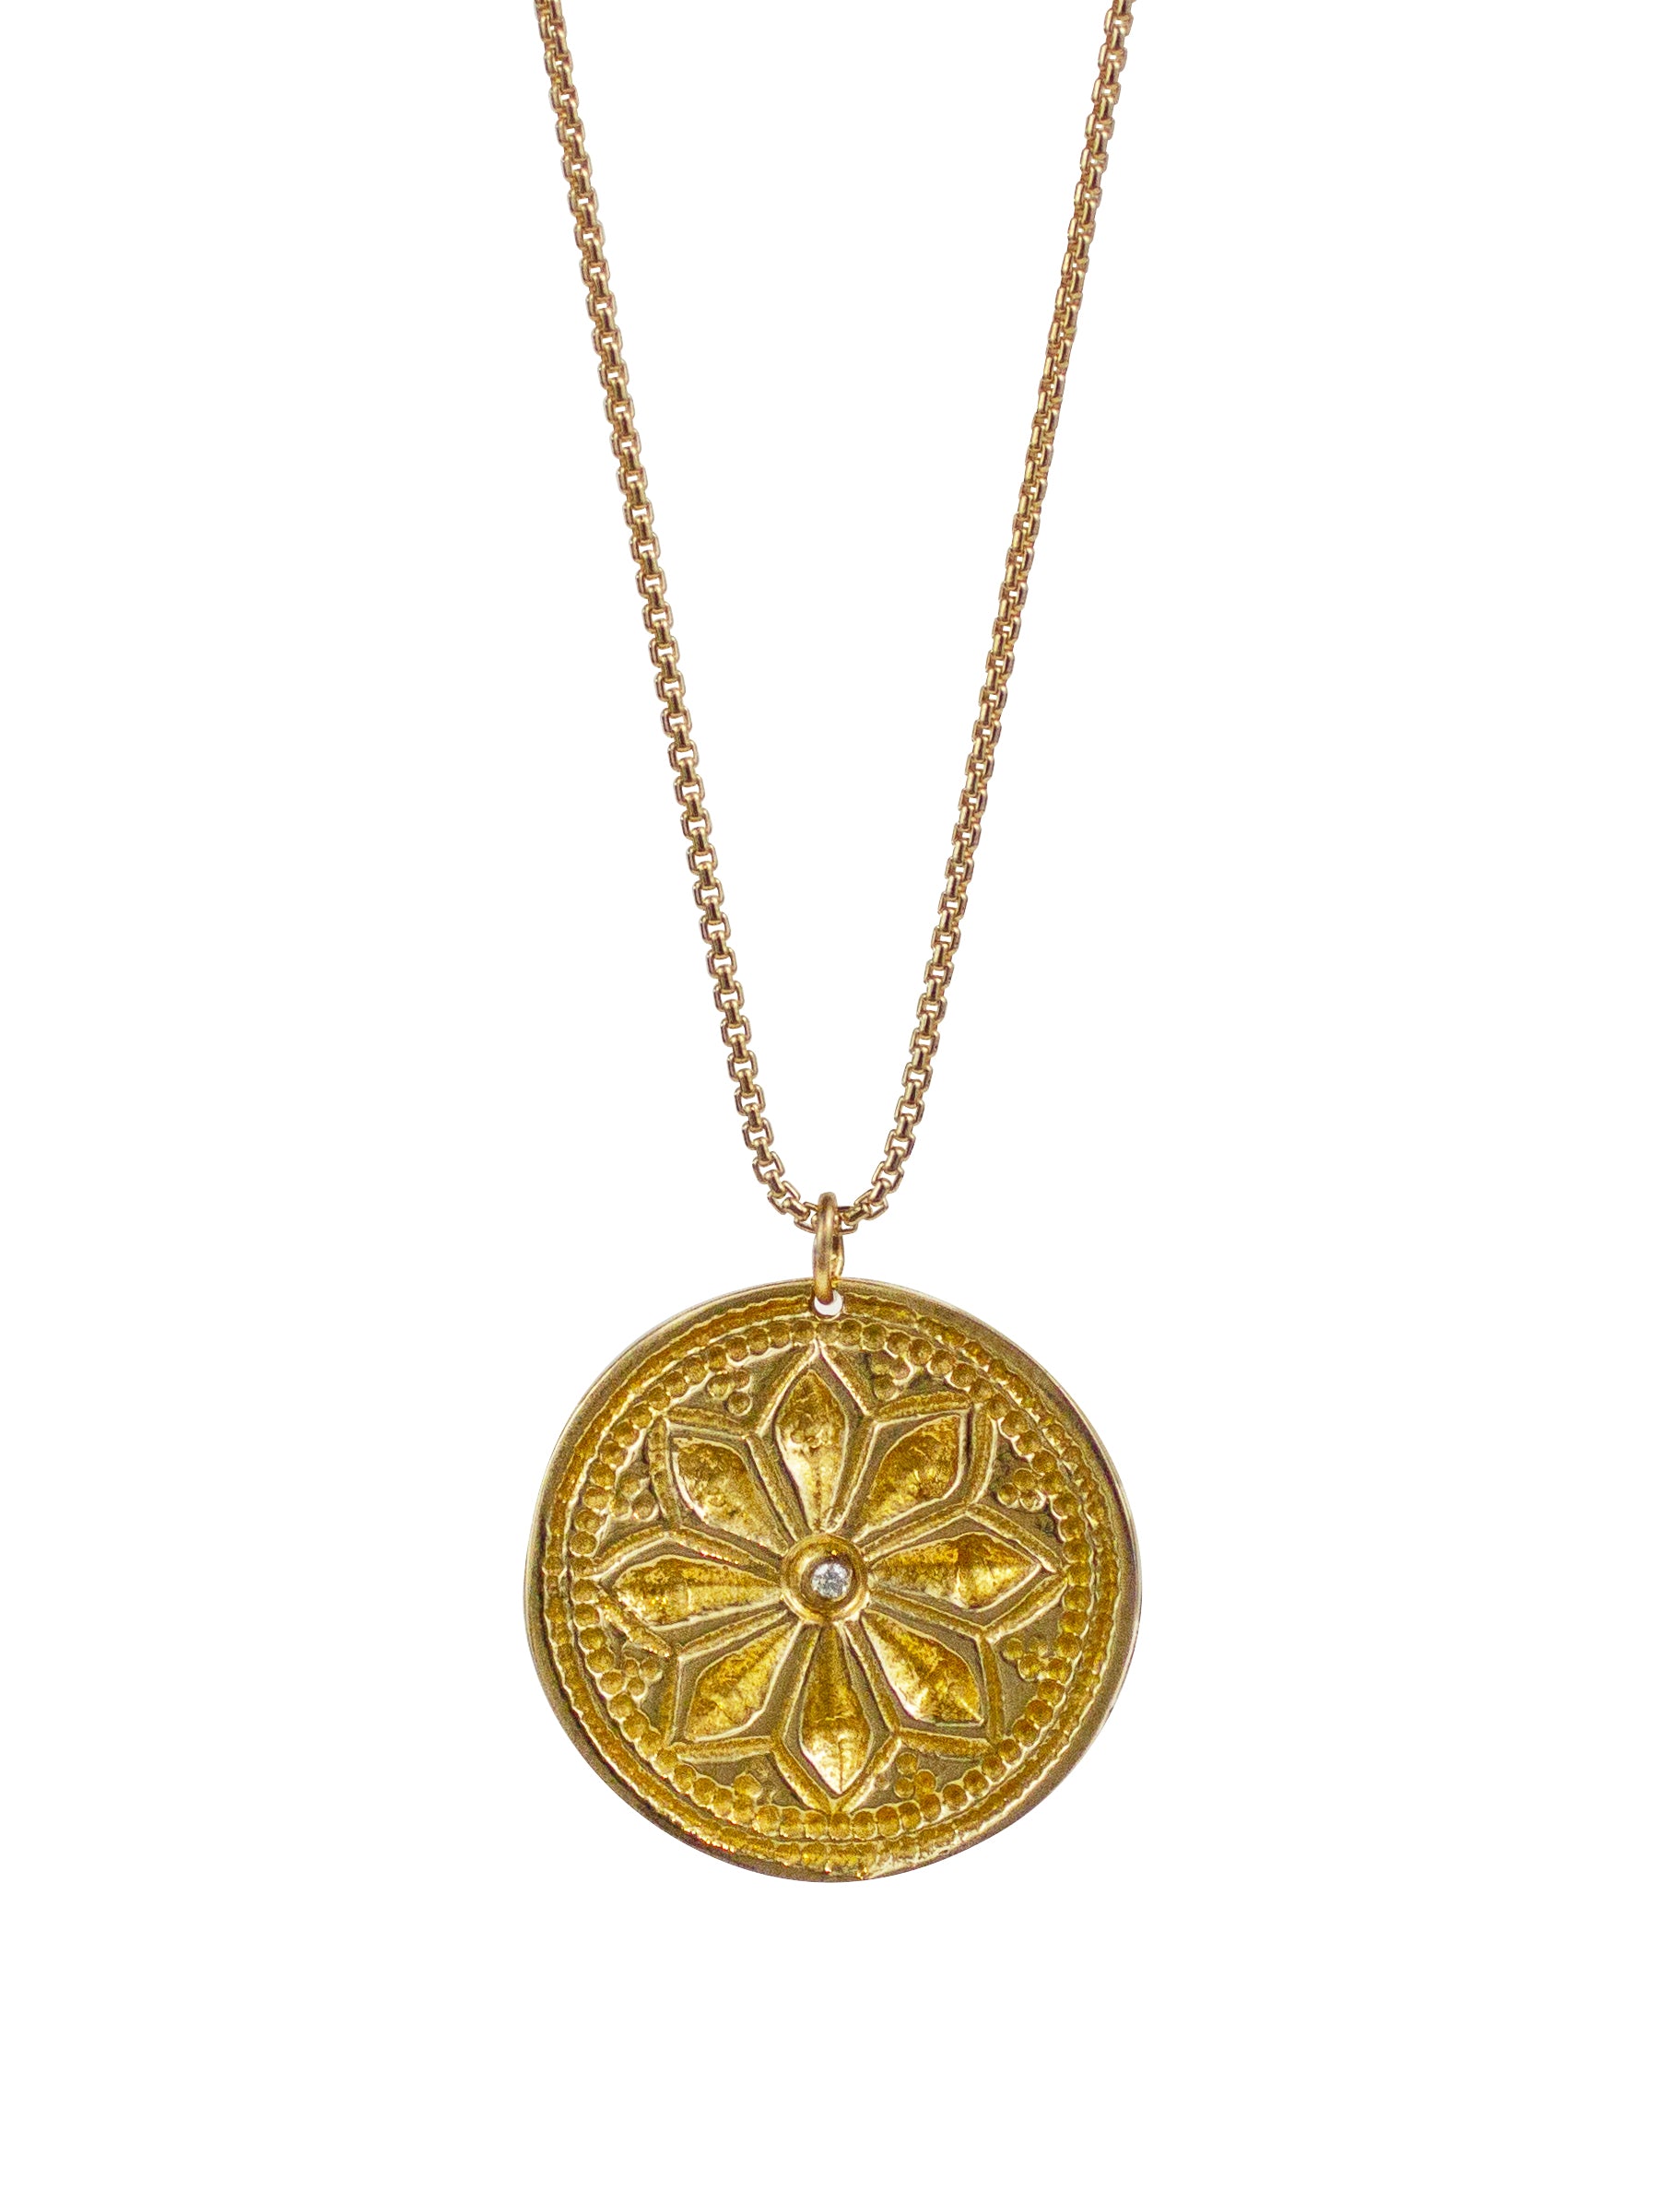 Lotus Necklace - large "bloom in unlikely places"